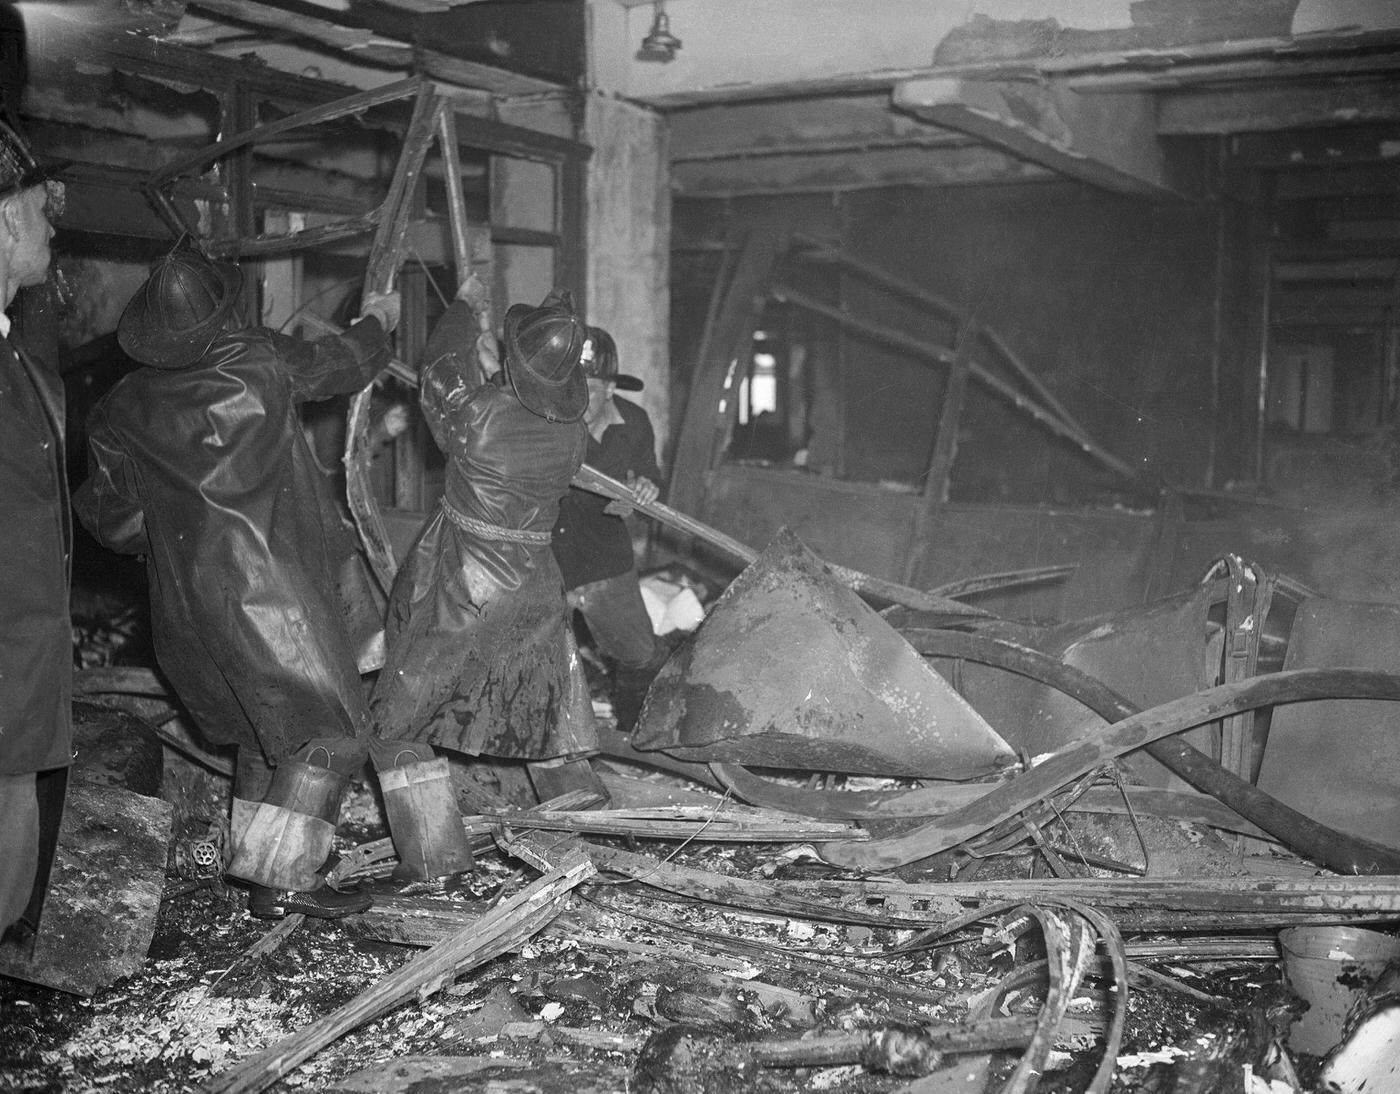 Firemen working amidst the wreckage from a plane which crashed in to the Empire State Building.